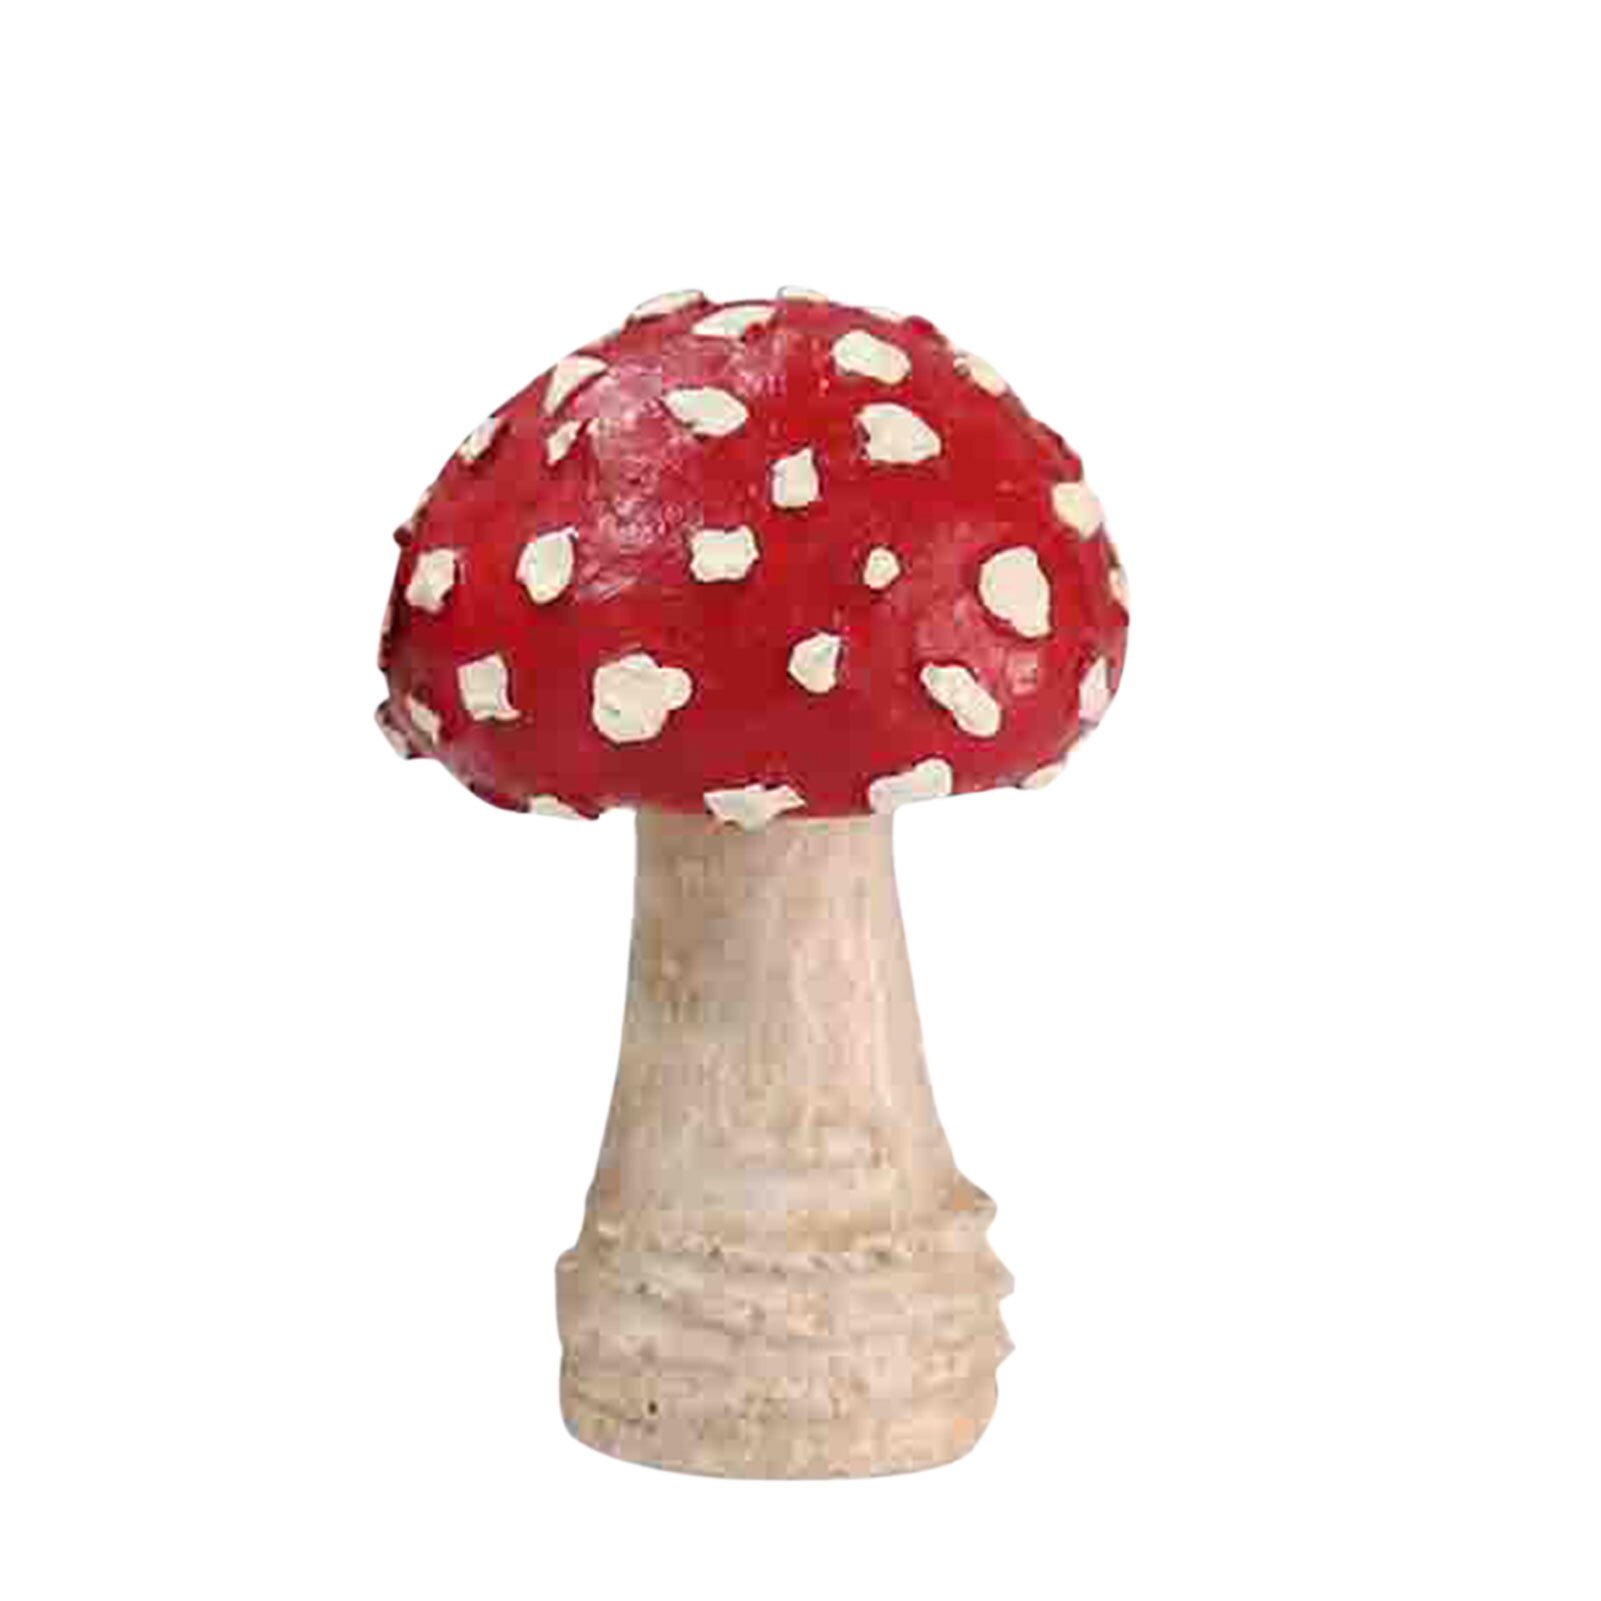 Simulation Resin Mushroom Garden Decoration Mushroom Statue perfect for home lawn or garden exquisite and compact: Red